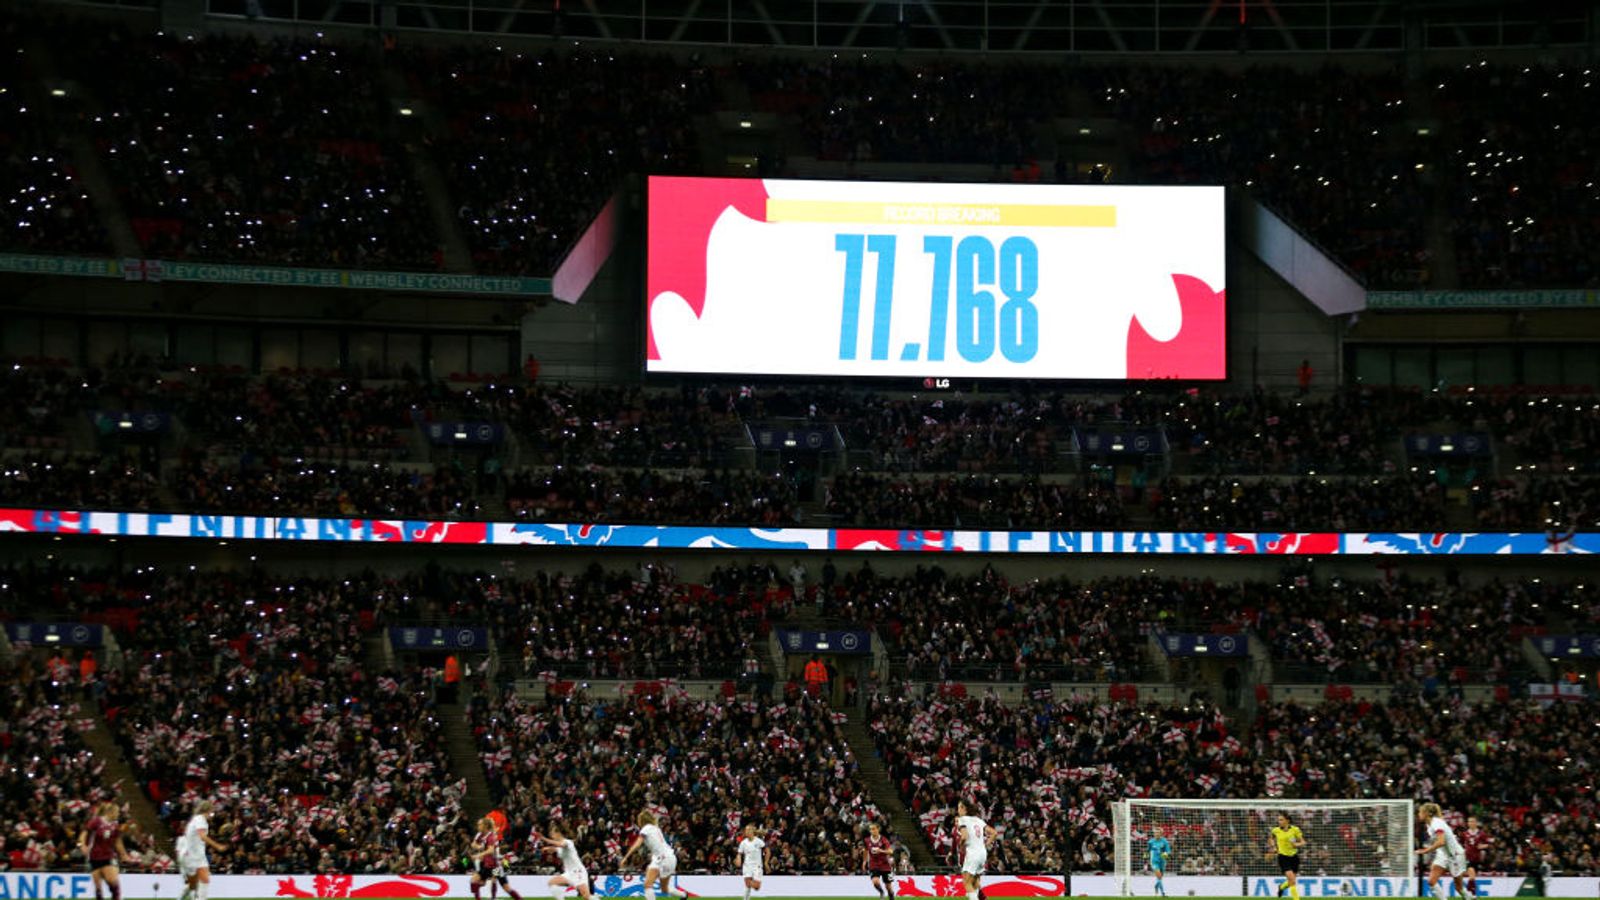 Record attendance as England's Lionesses lose to Germany at Wembley - Sky News